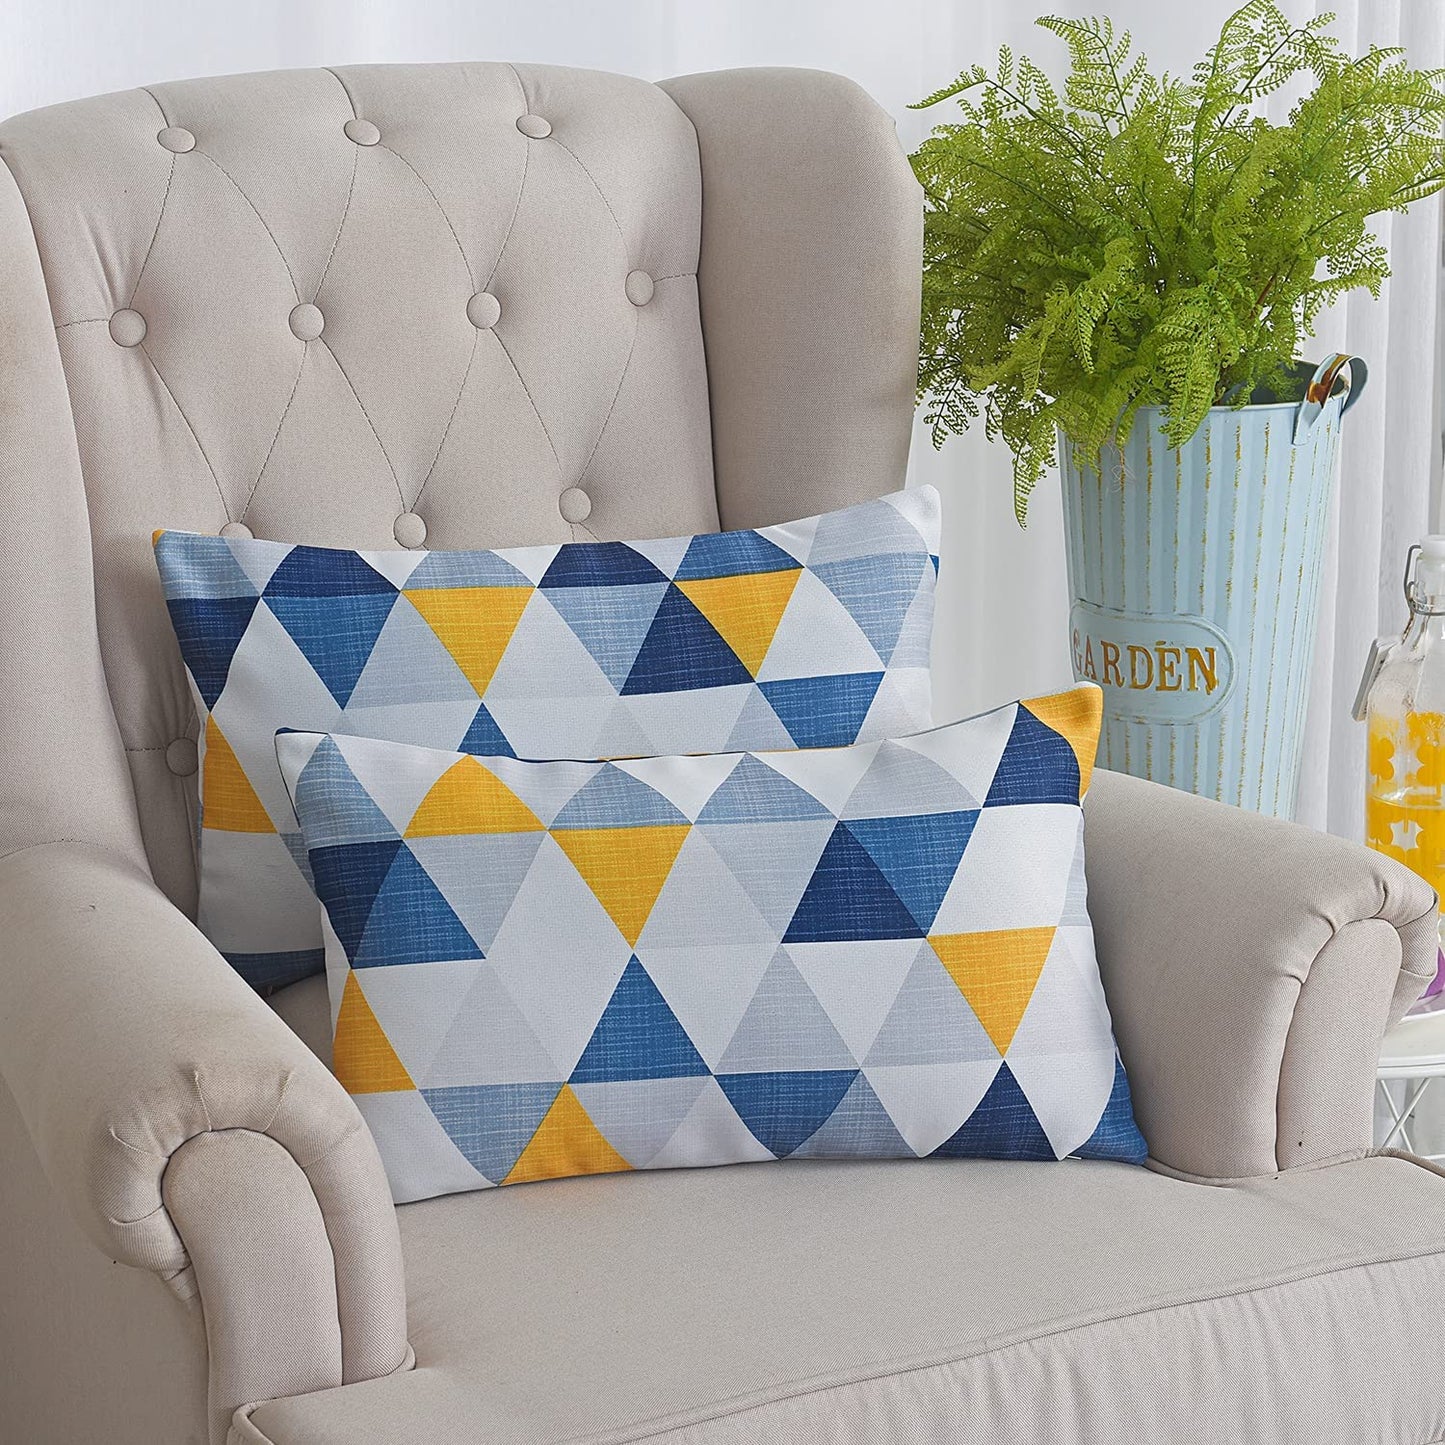 Pillow Covers Set of 2, Decorative Colorful Triangle Pattern